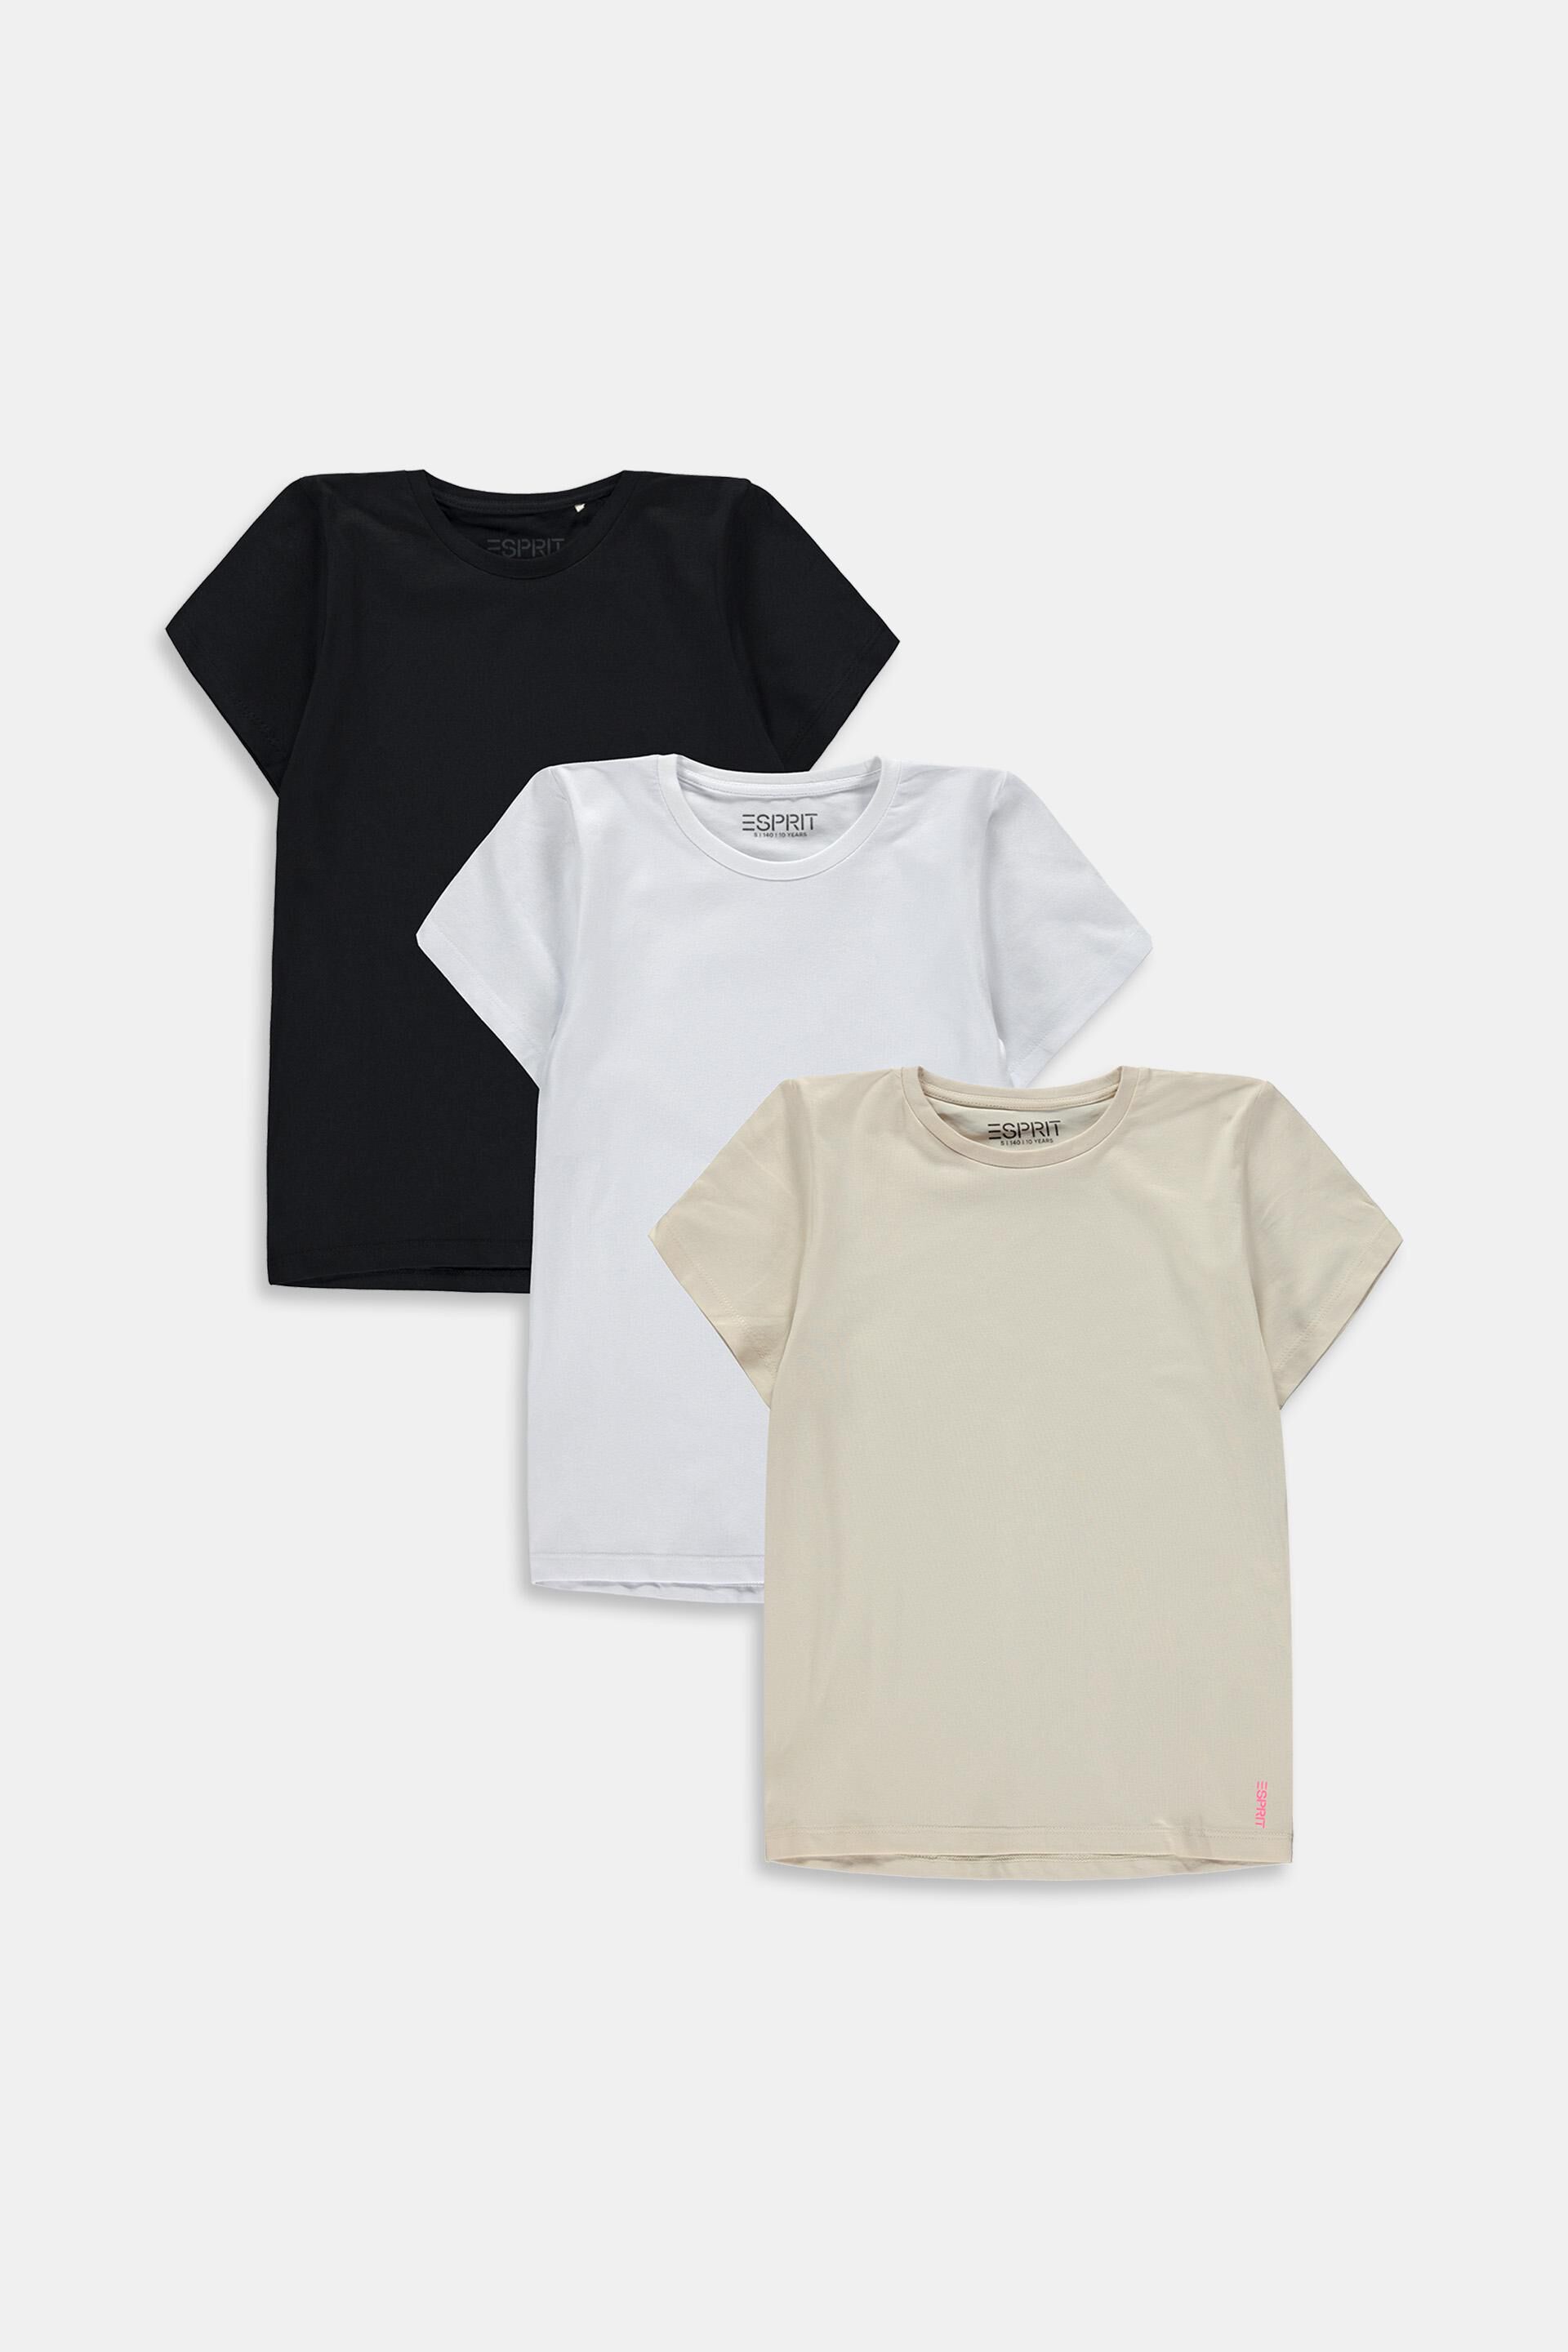 Esprit Outlet 3-pack of t-shirts